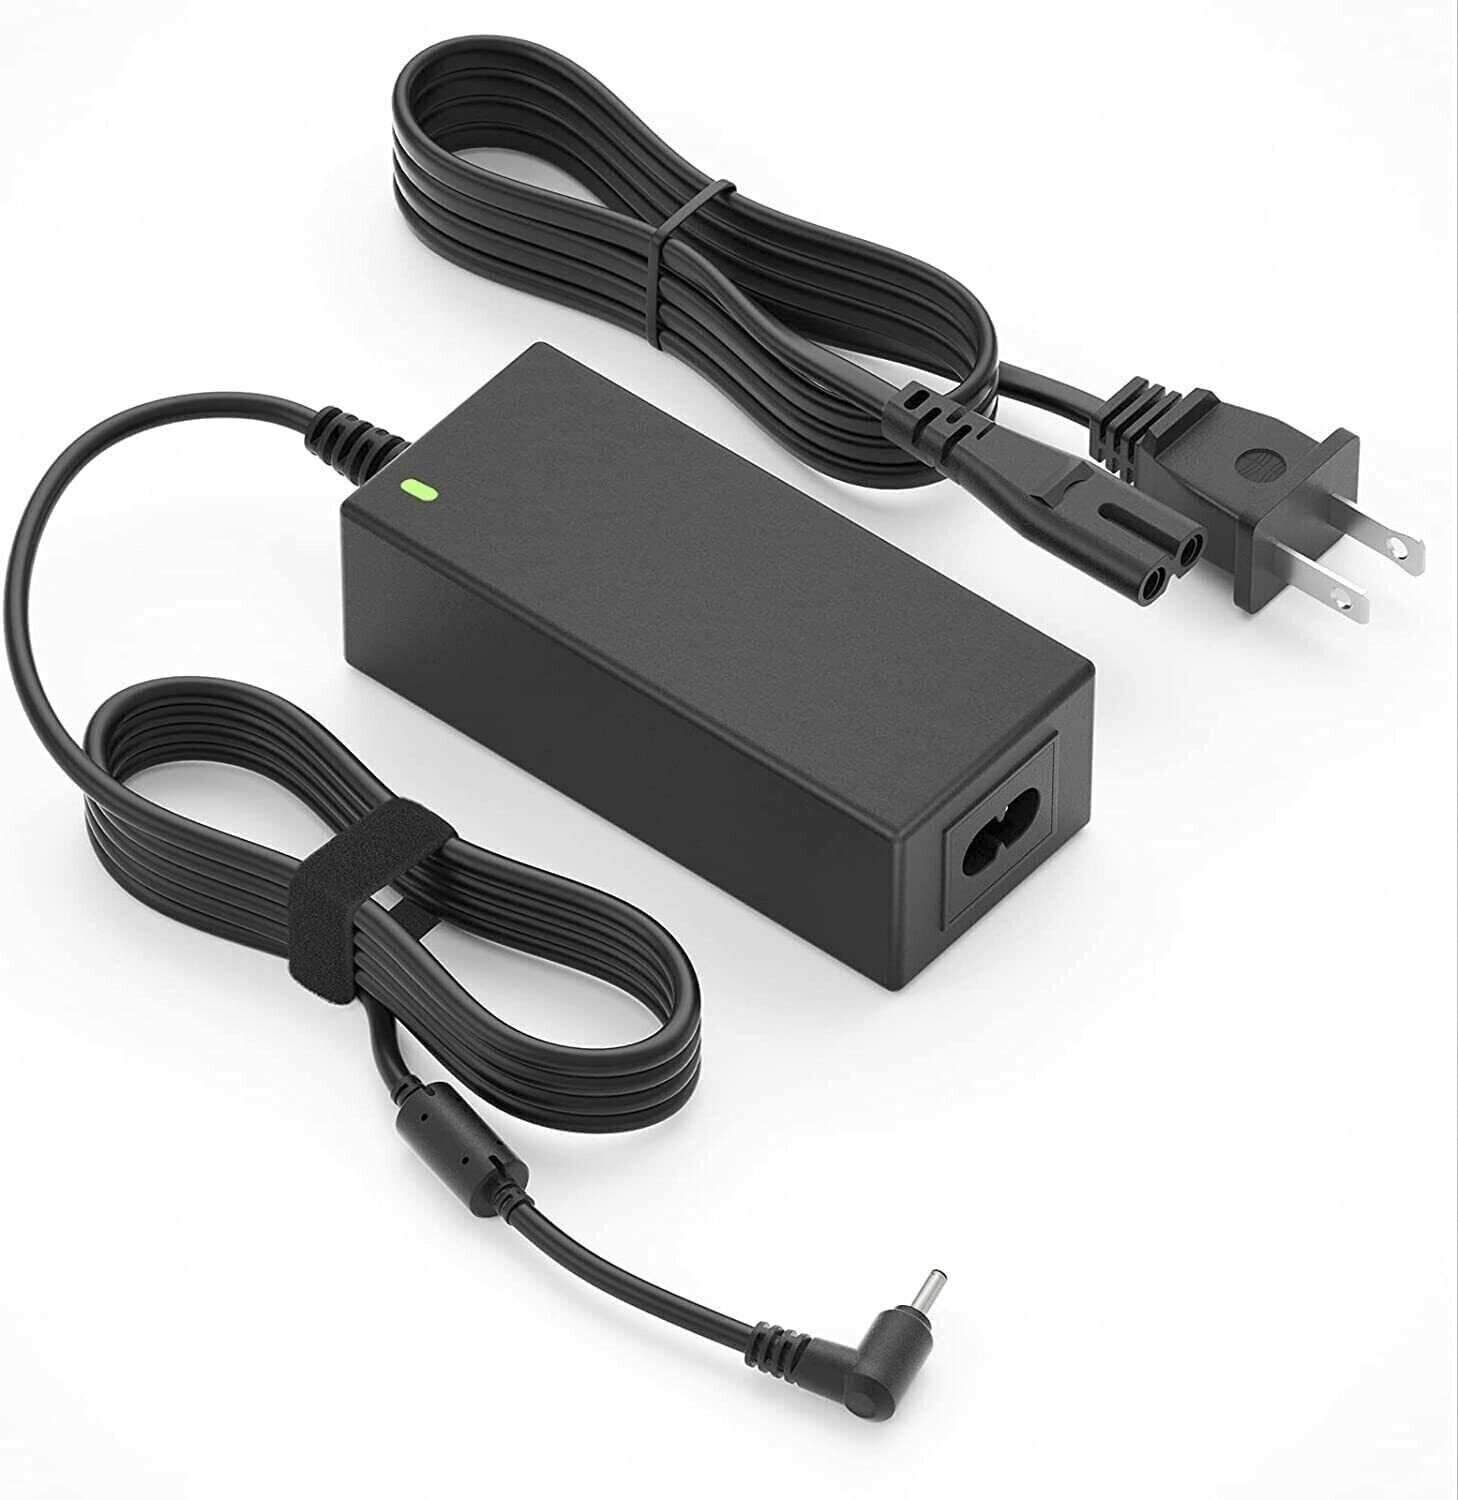 40W 12V 3.33A AC Laptop Charger for Samsung Chrome/ATIV Book, Notebook Adapter